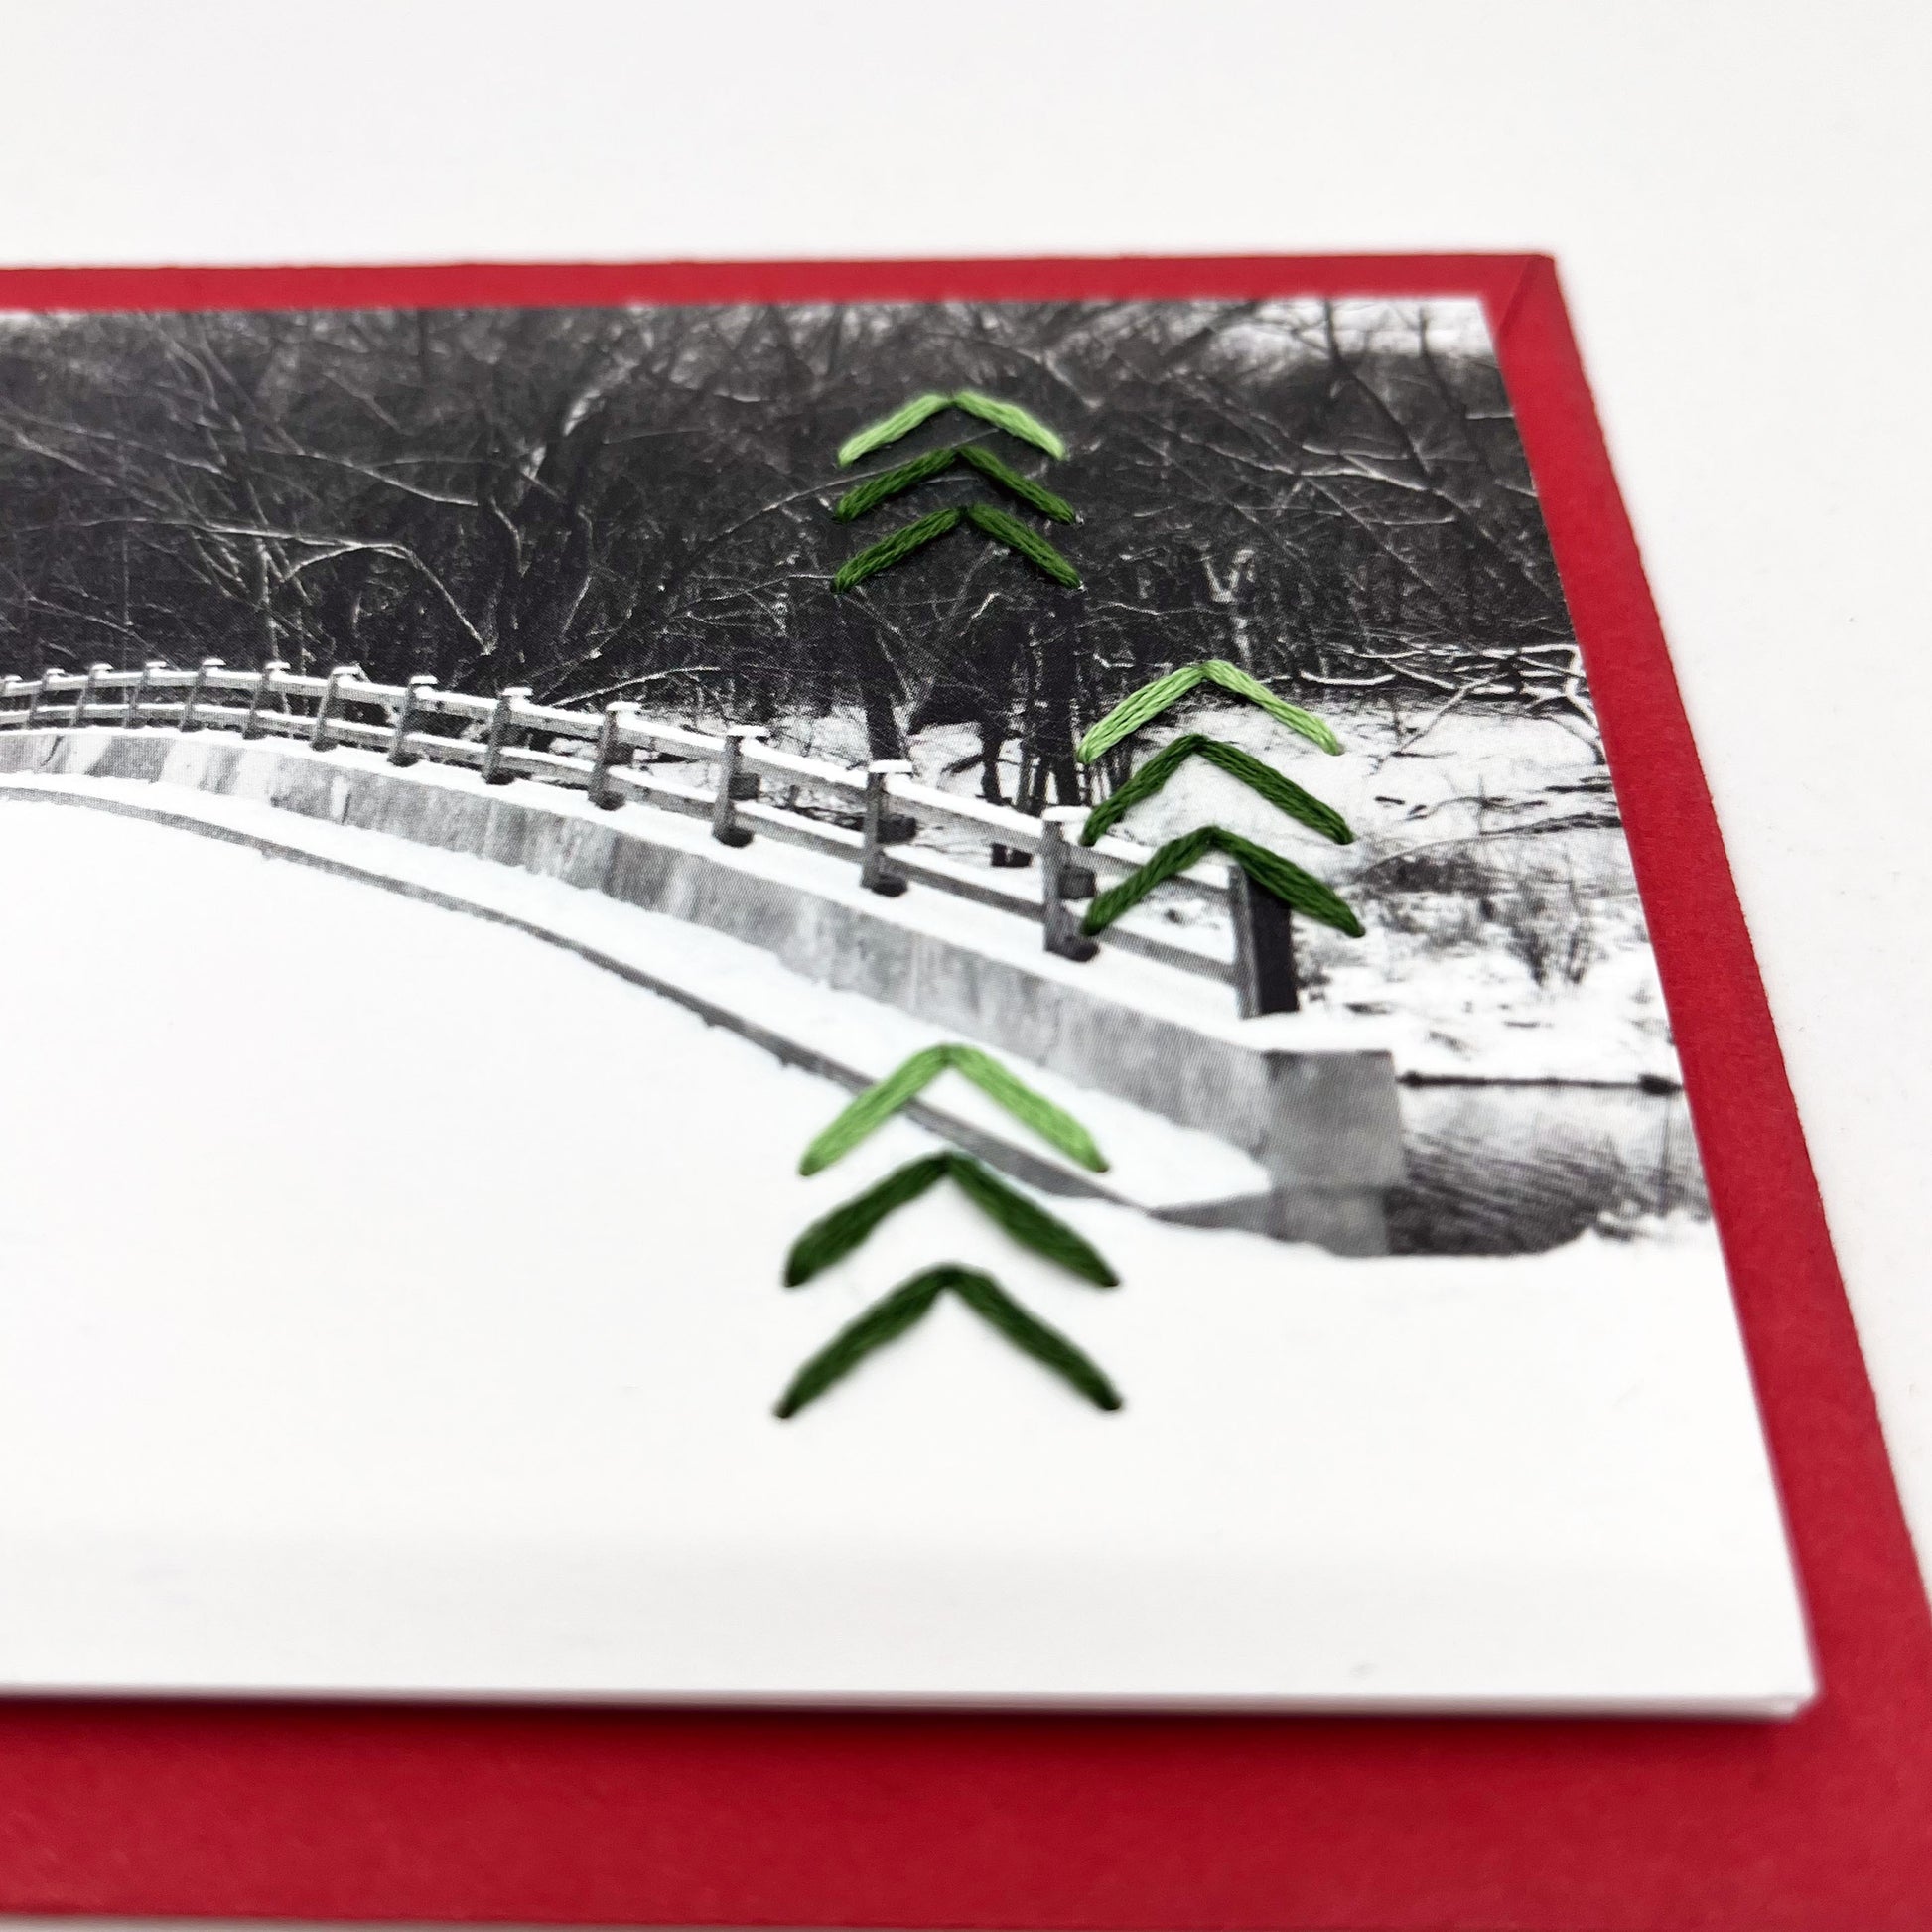 Greeting card flat on an envelope. Photo of snow covered bridge. Green stitches of groups of 3 chevrons to create abstract pine tree shape